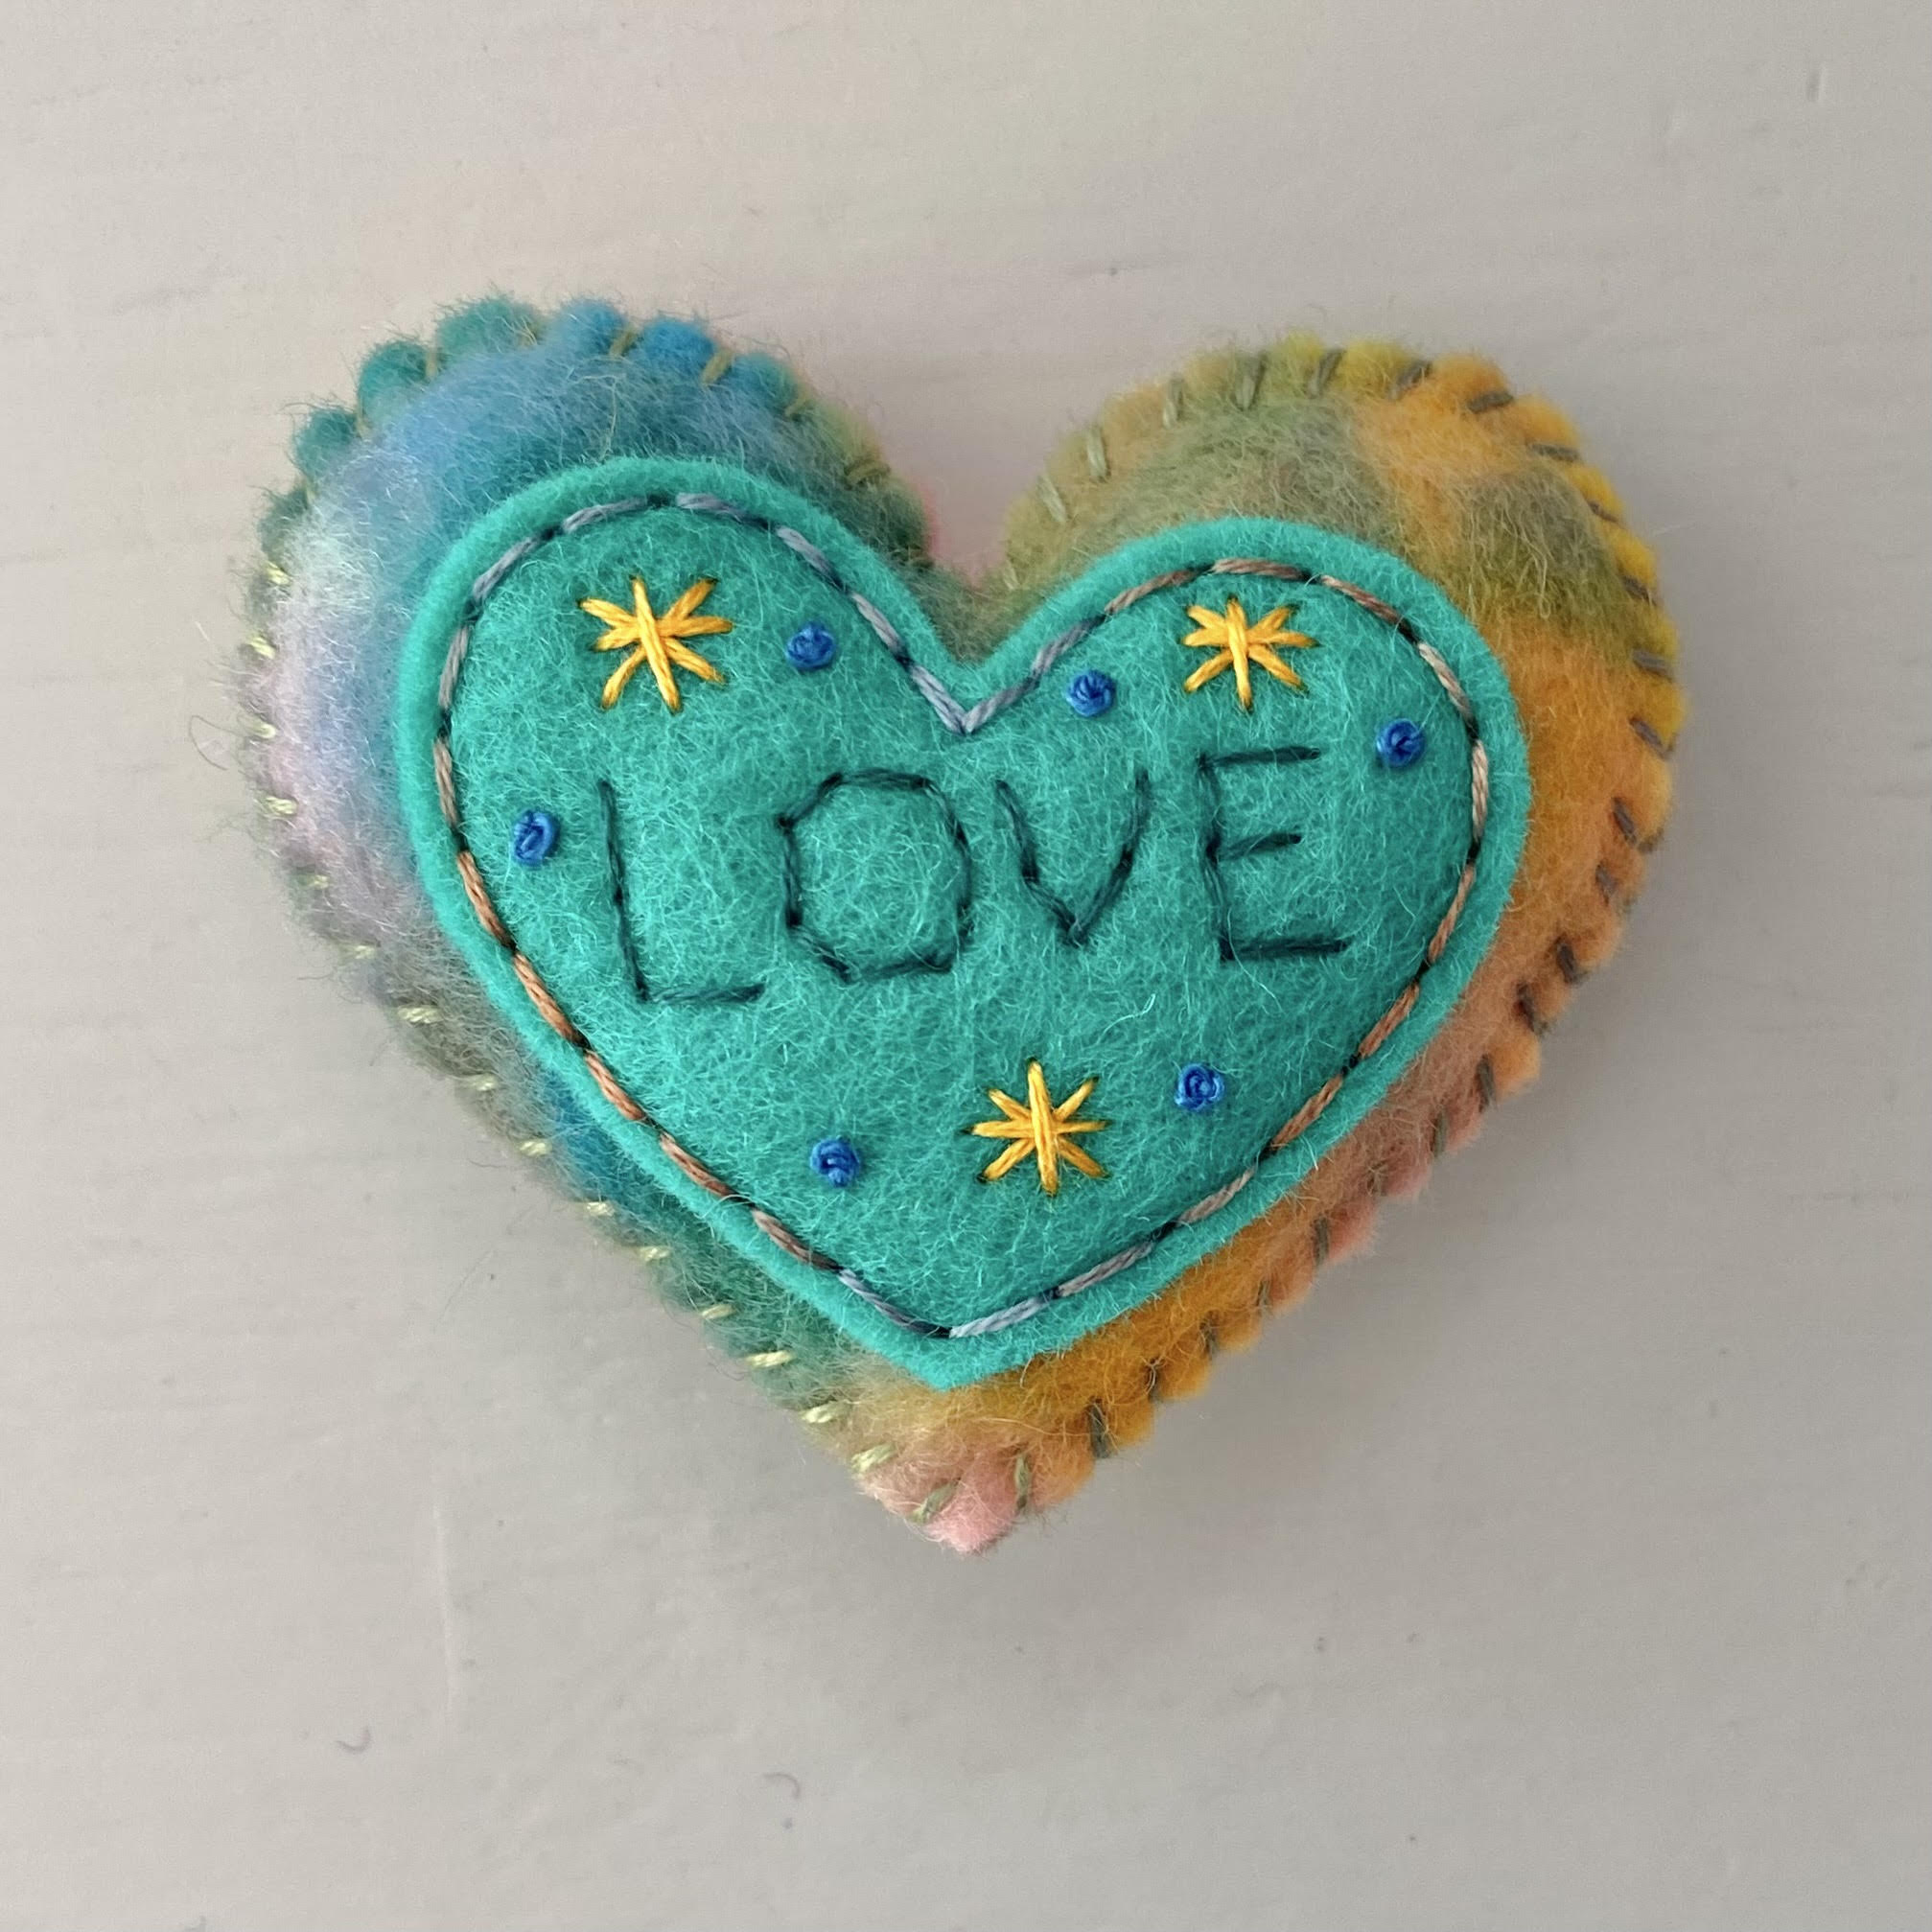 Embellished Heart with Word (6cm)